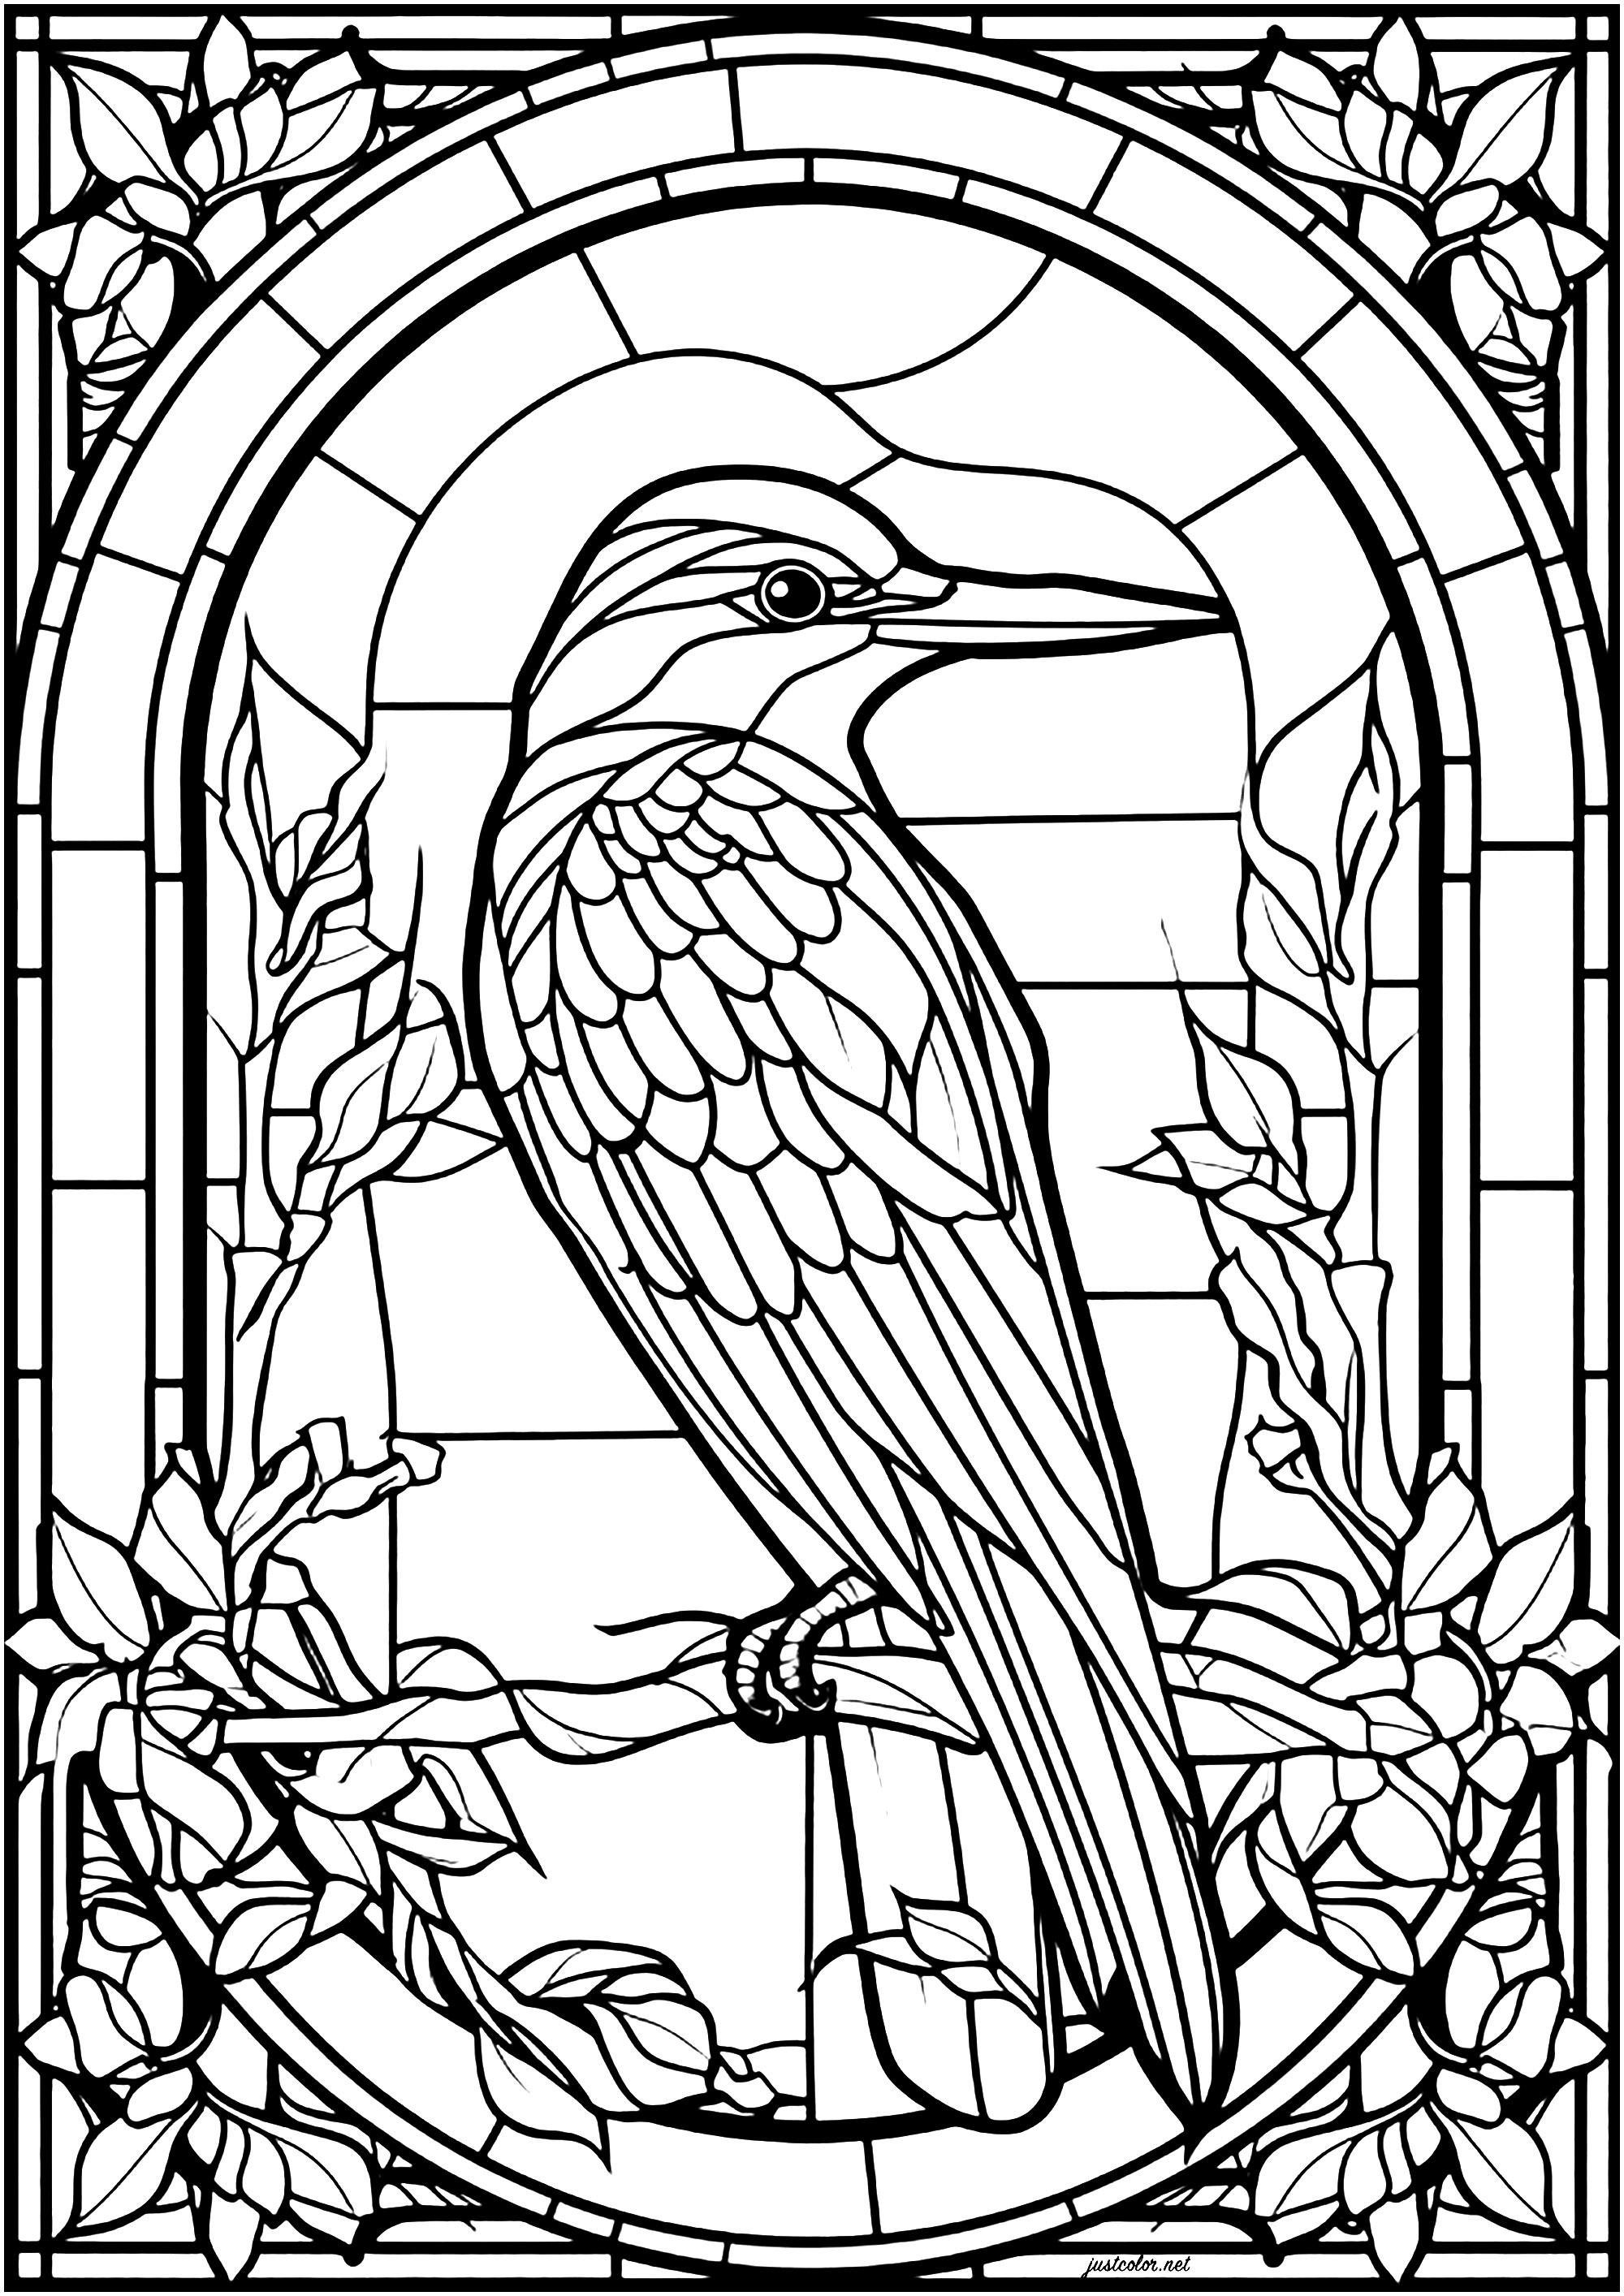 Bird in a pretty stained glass window. This bird is a kingfisher